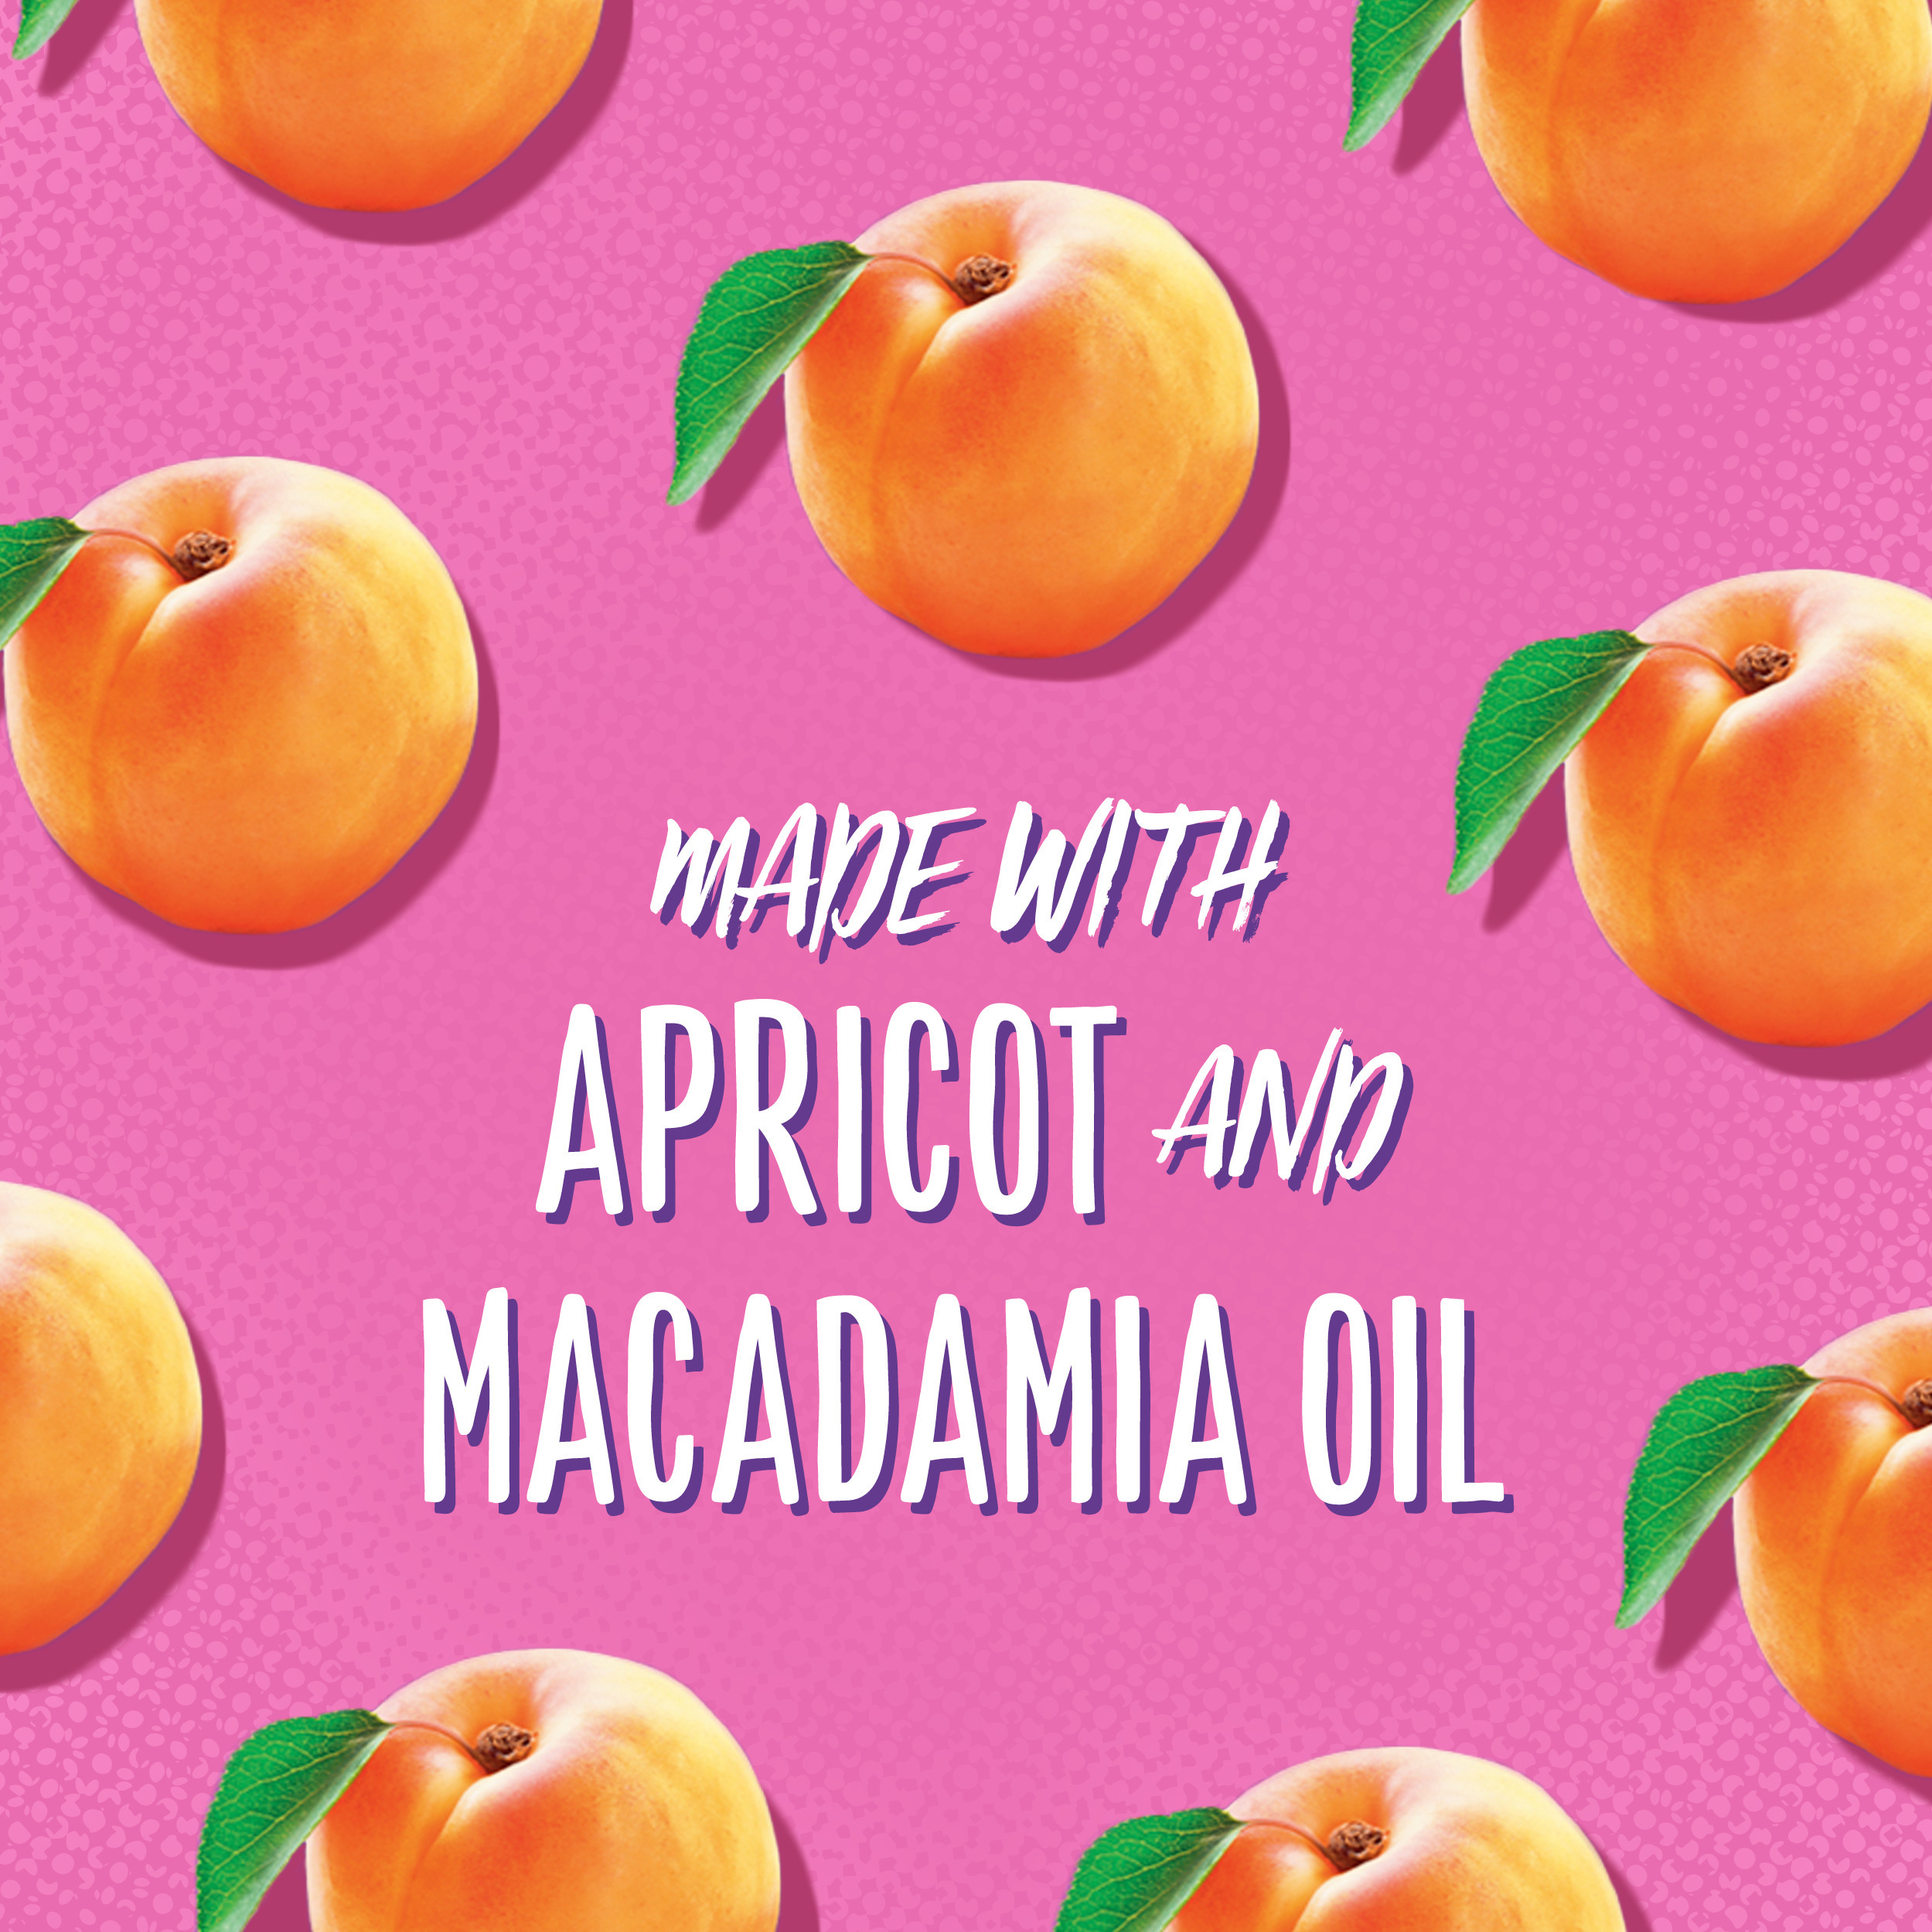 Aussie Total Miracle Apricot & Macadamia Oil, Shampoo & Conditioner Pack, All Hair Types, 26.2 fl oz - image 8 of 10